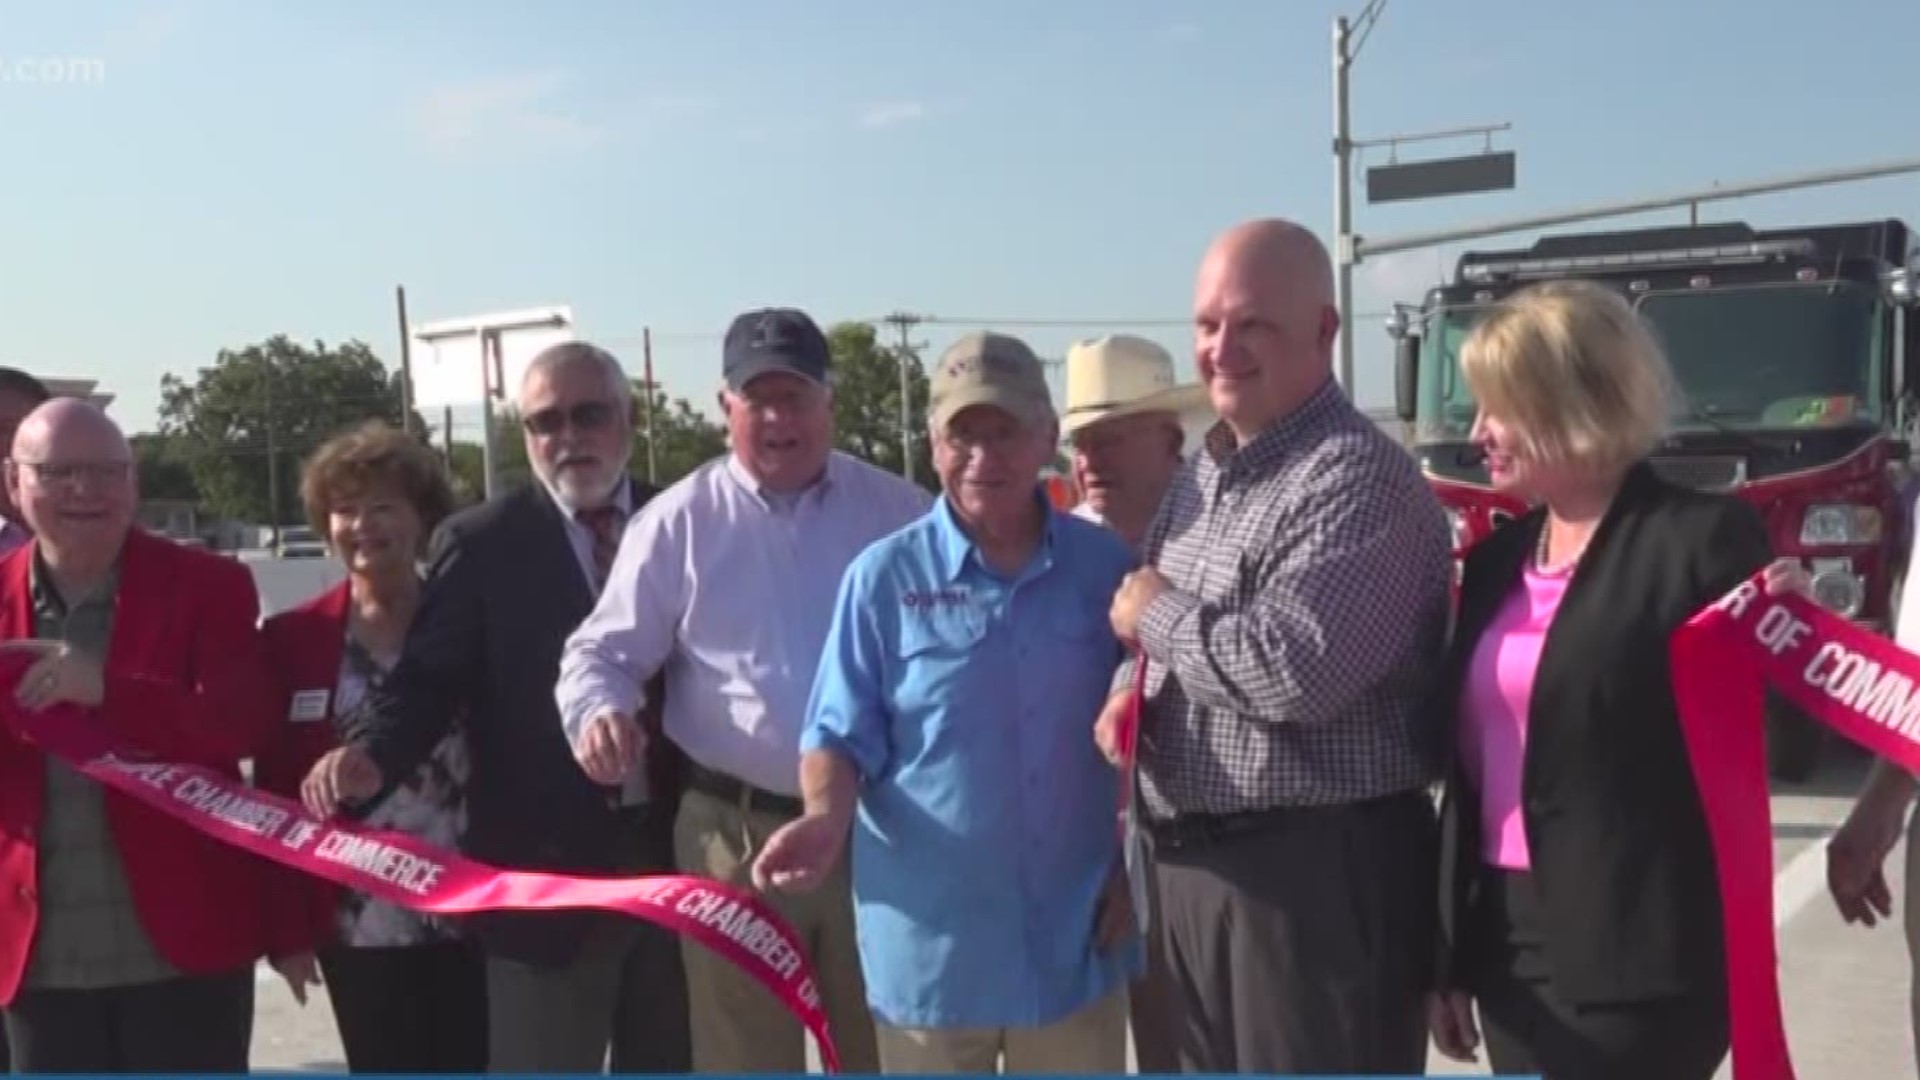 A ribbon cutting event took place at the 57th Street Bridge Thursday morning to celebrate the completion of the project.